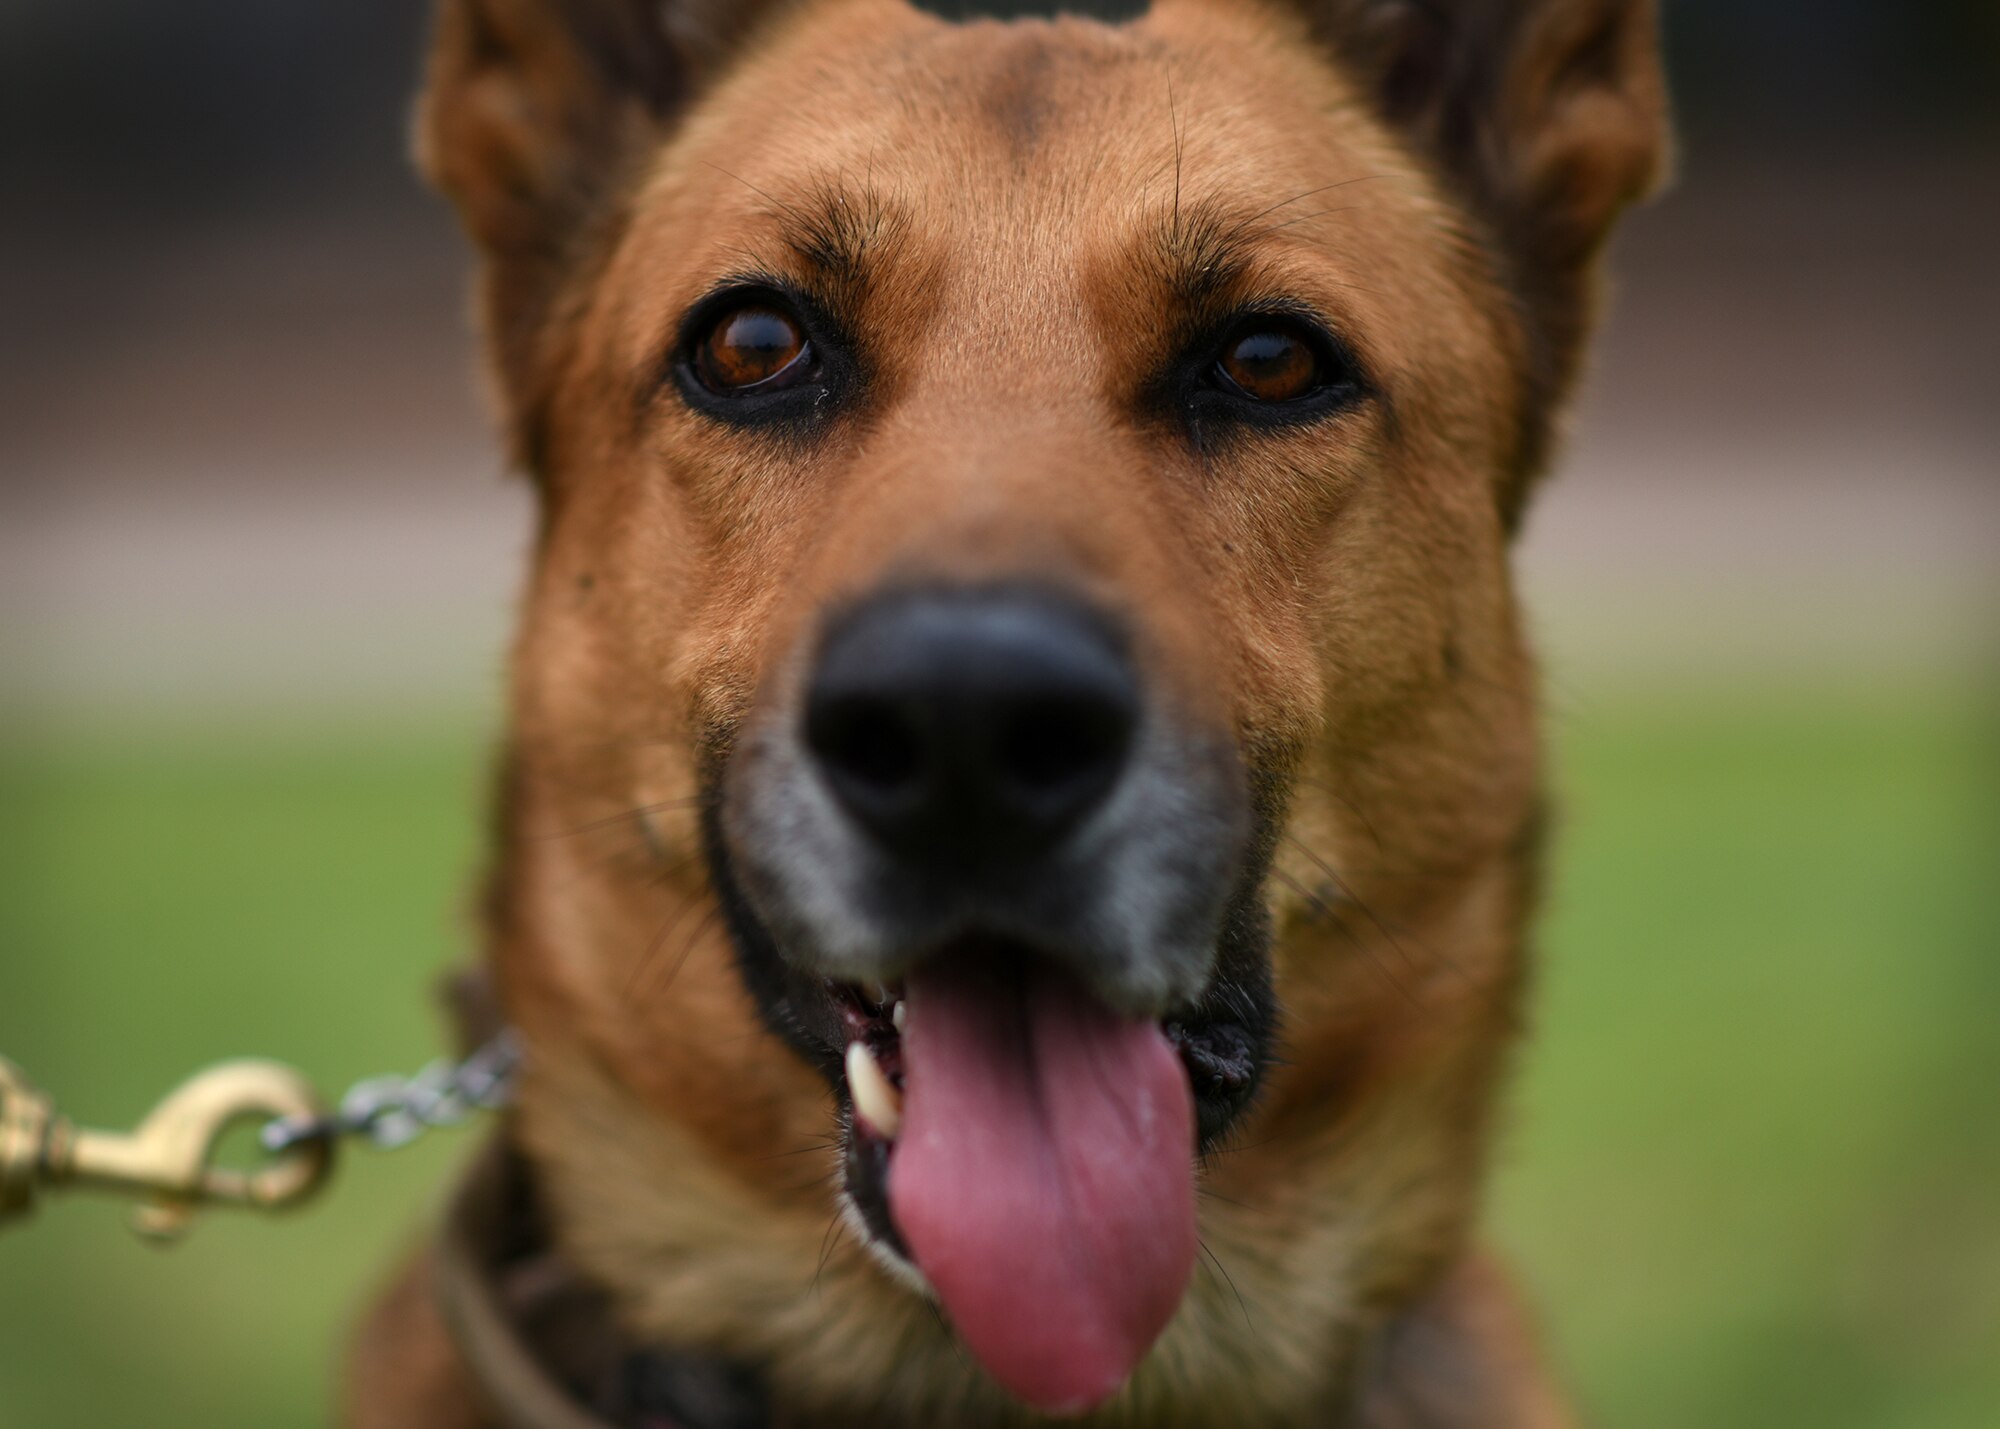 photo of a military working dog with its tongue hanging out